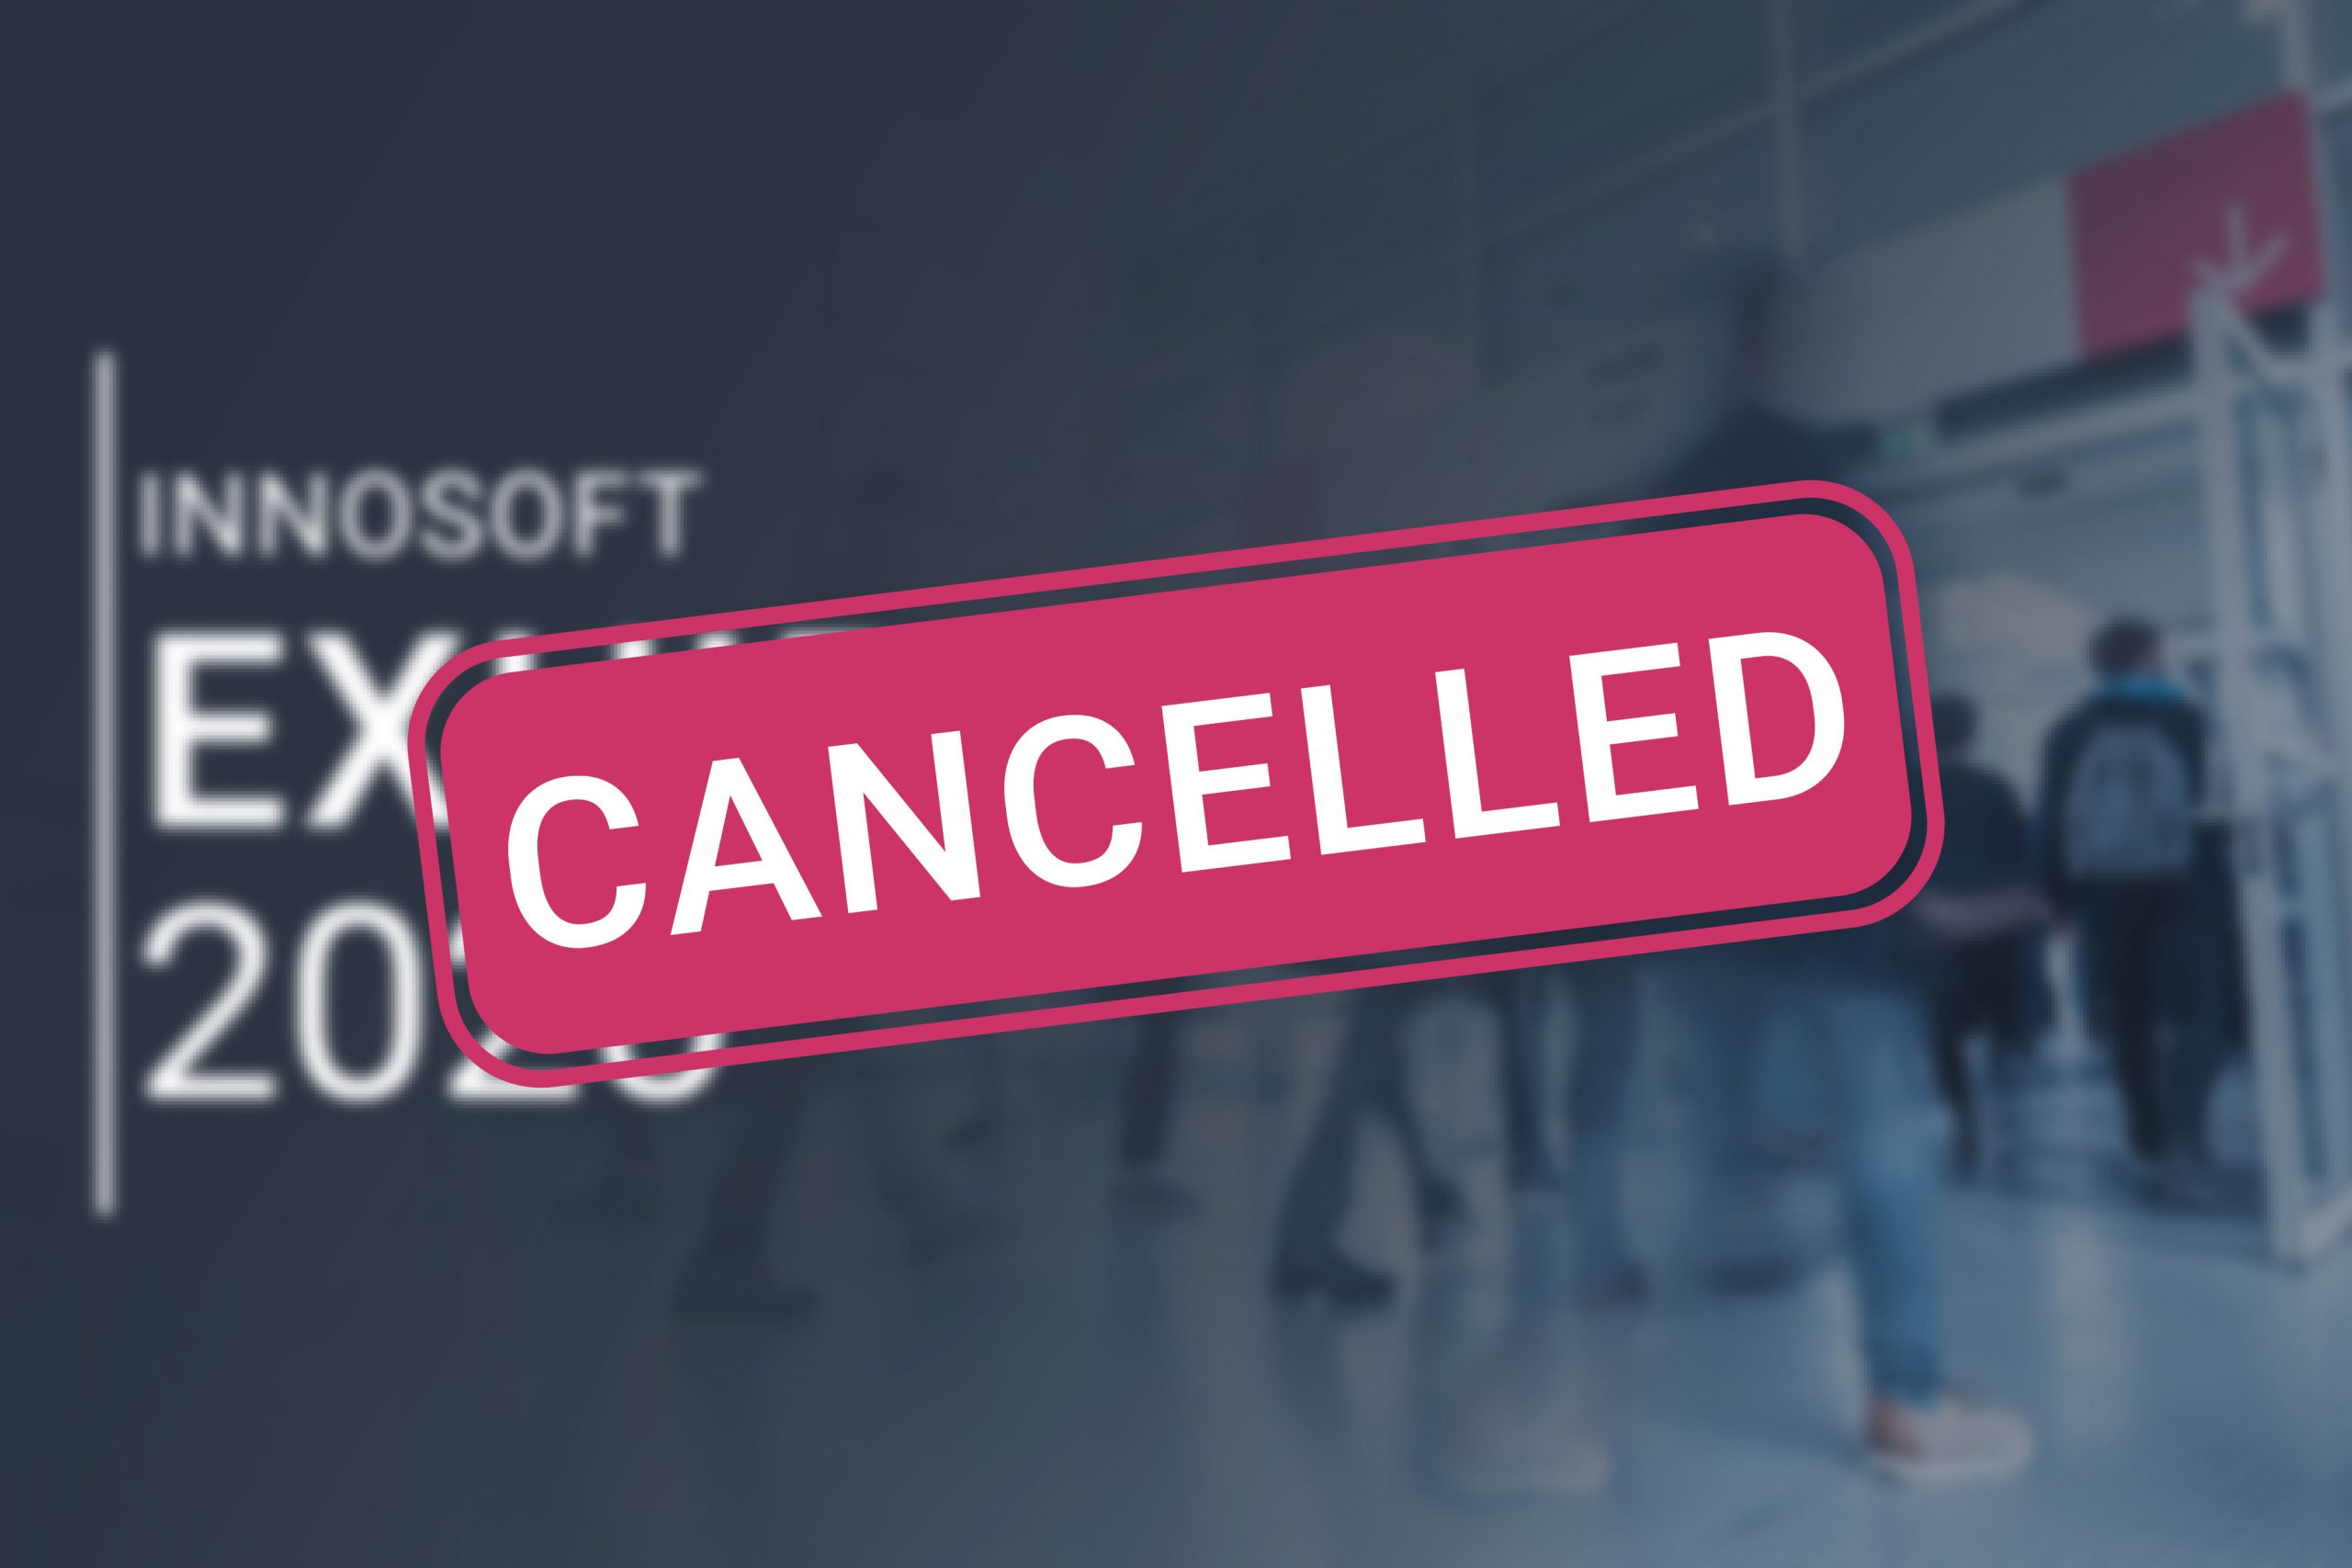 Exhibitions canceled